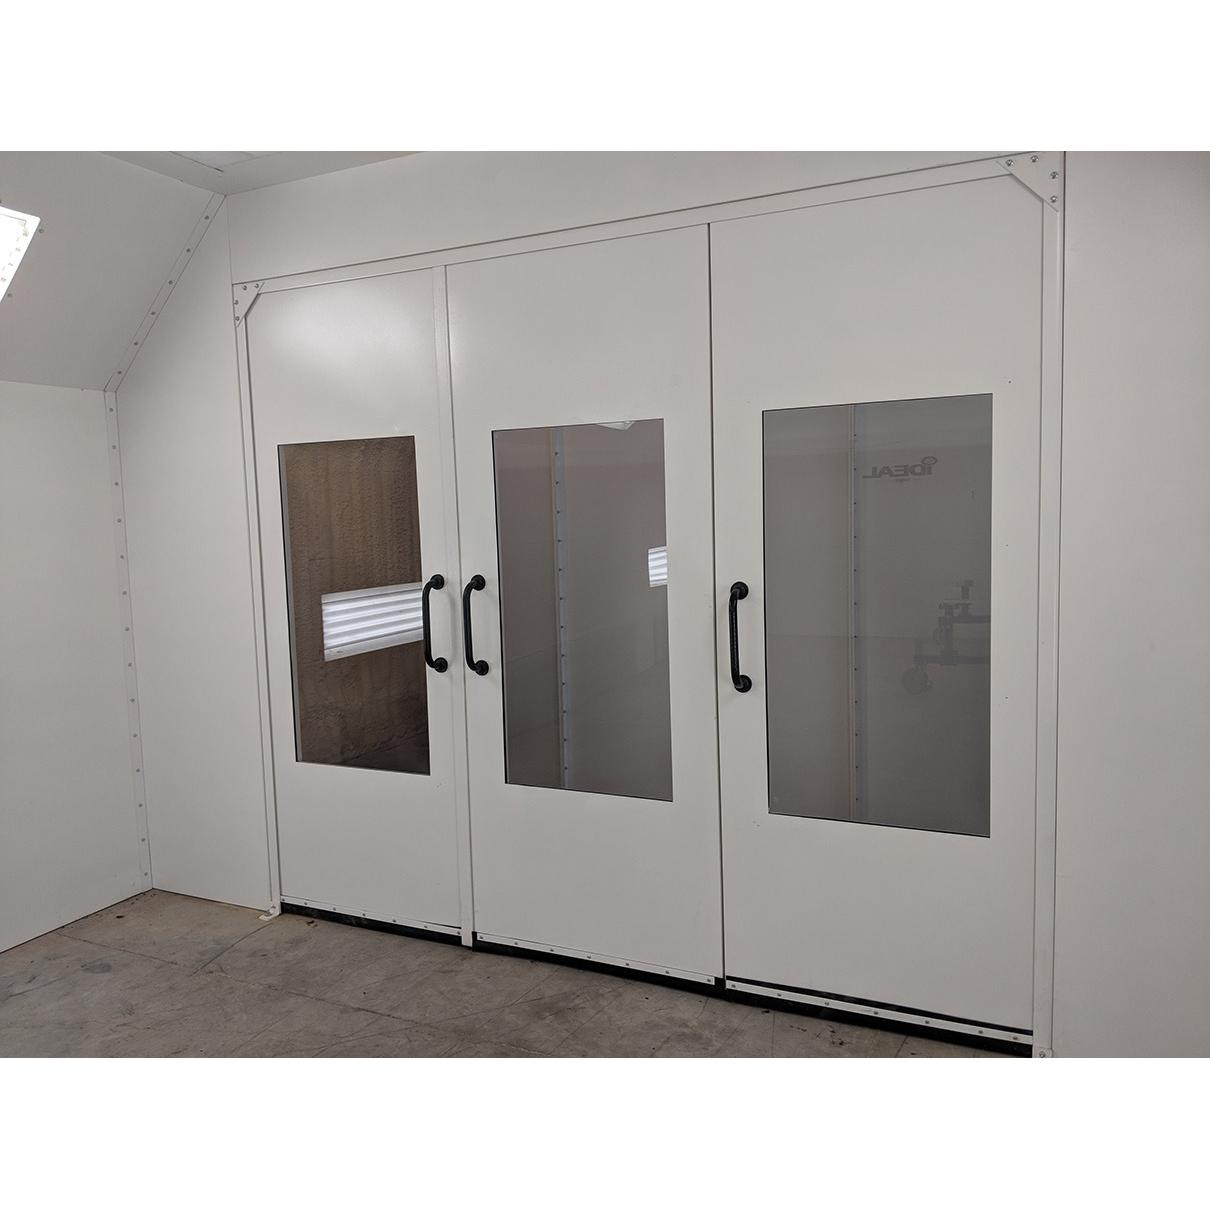 iDEAL Side Down Draft Paint Booth